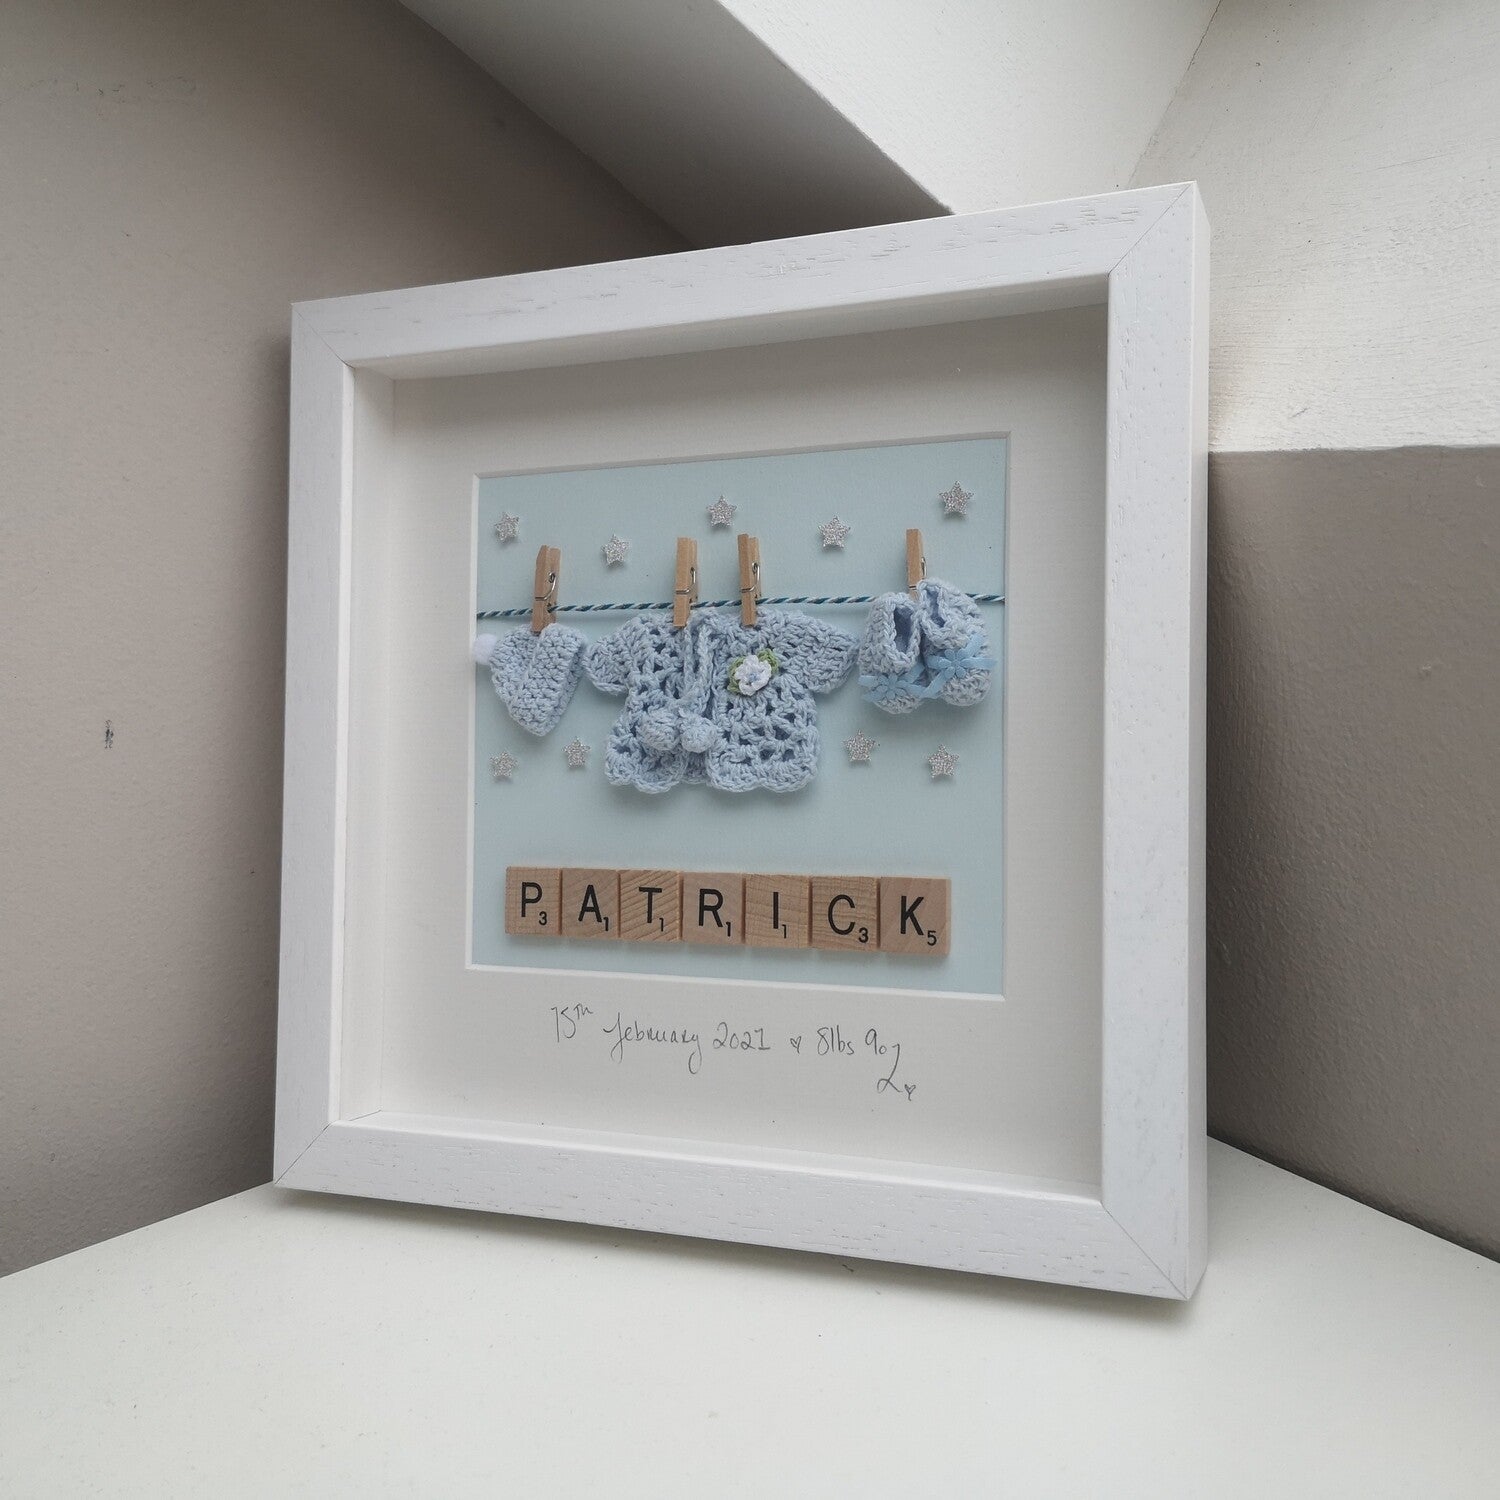 A personalised baby blue washing line with crochet hat, cardie & booties, with a name in wooden scrabble tiles below the washing line, in a handmade 25x25cm deep box wooden frame.